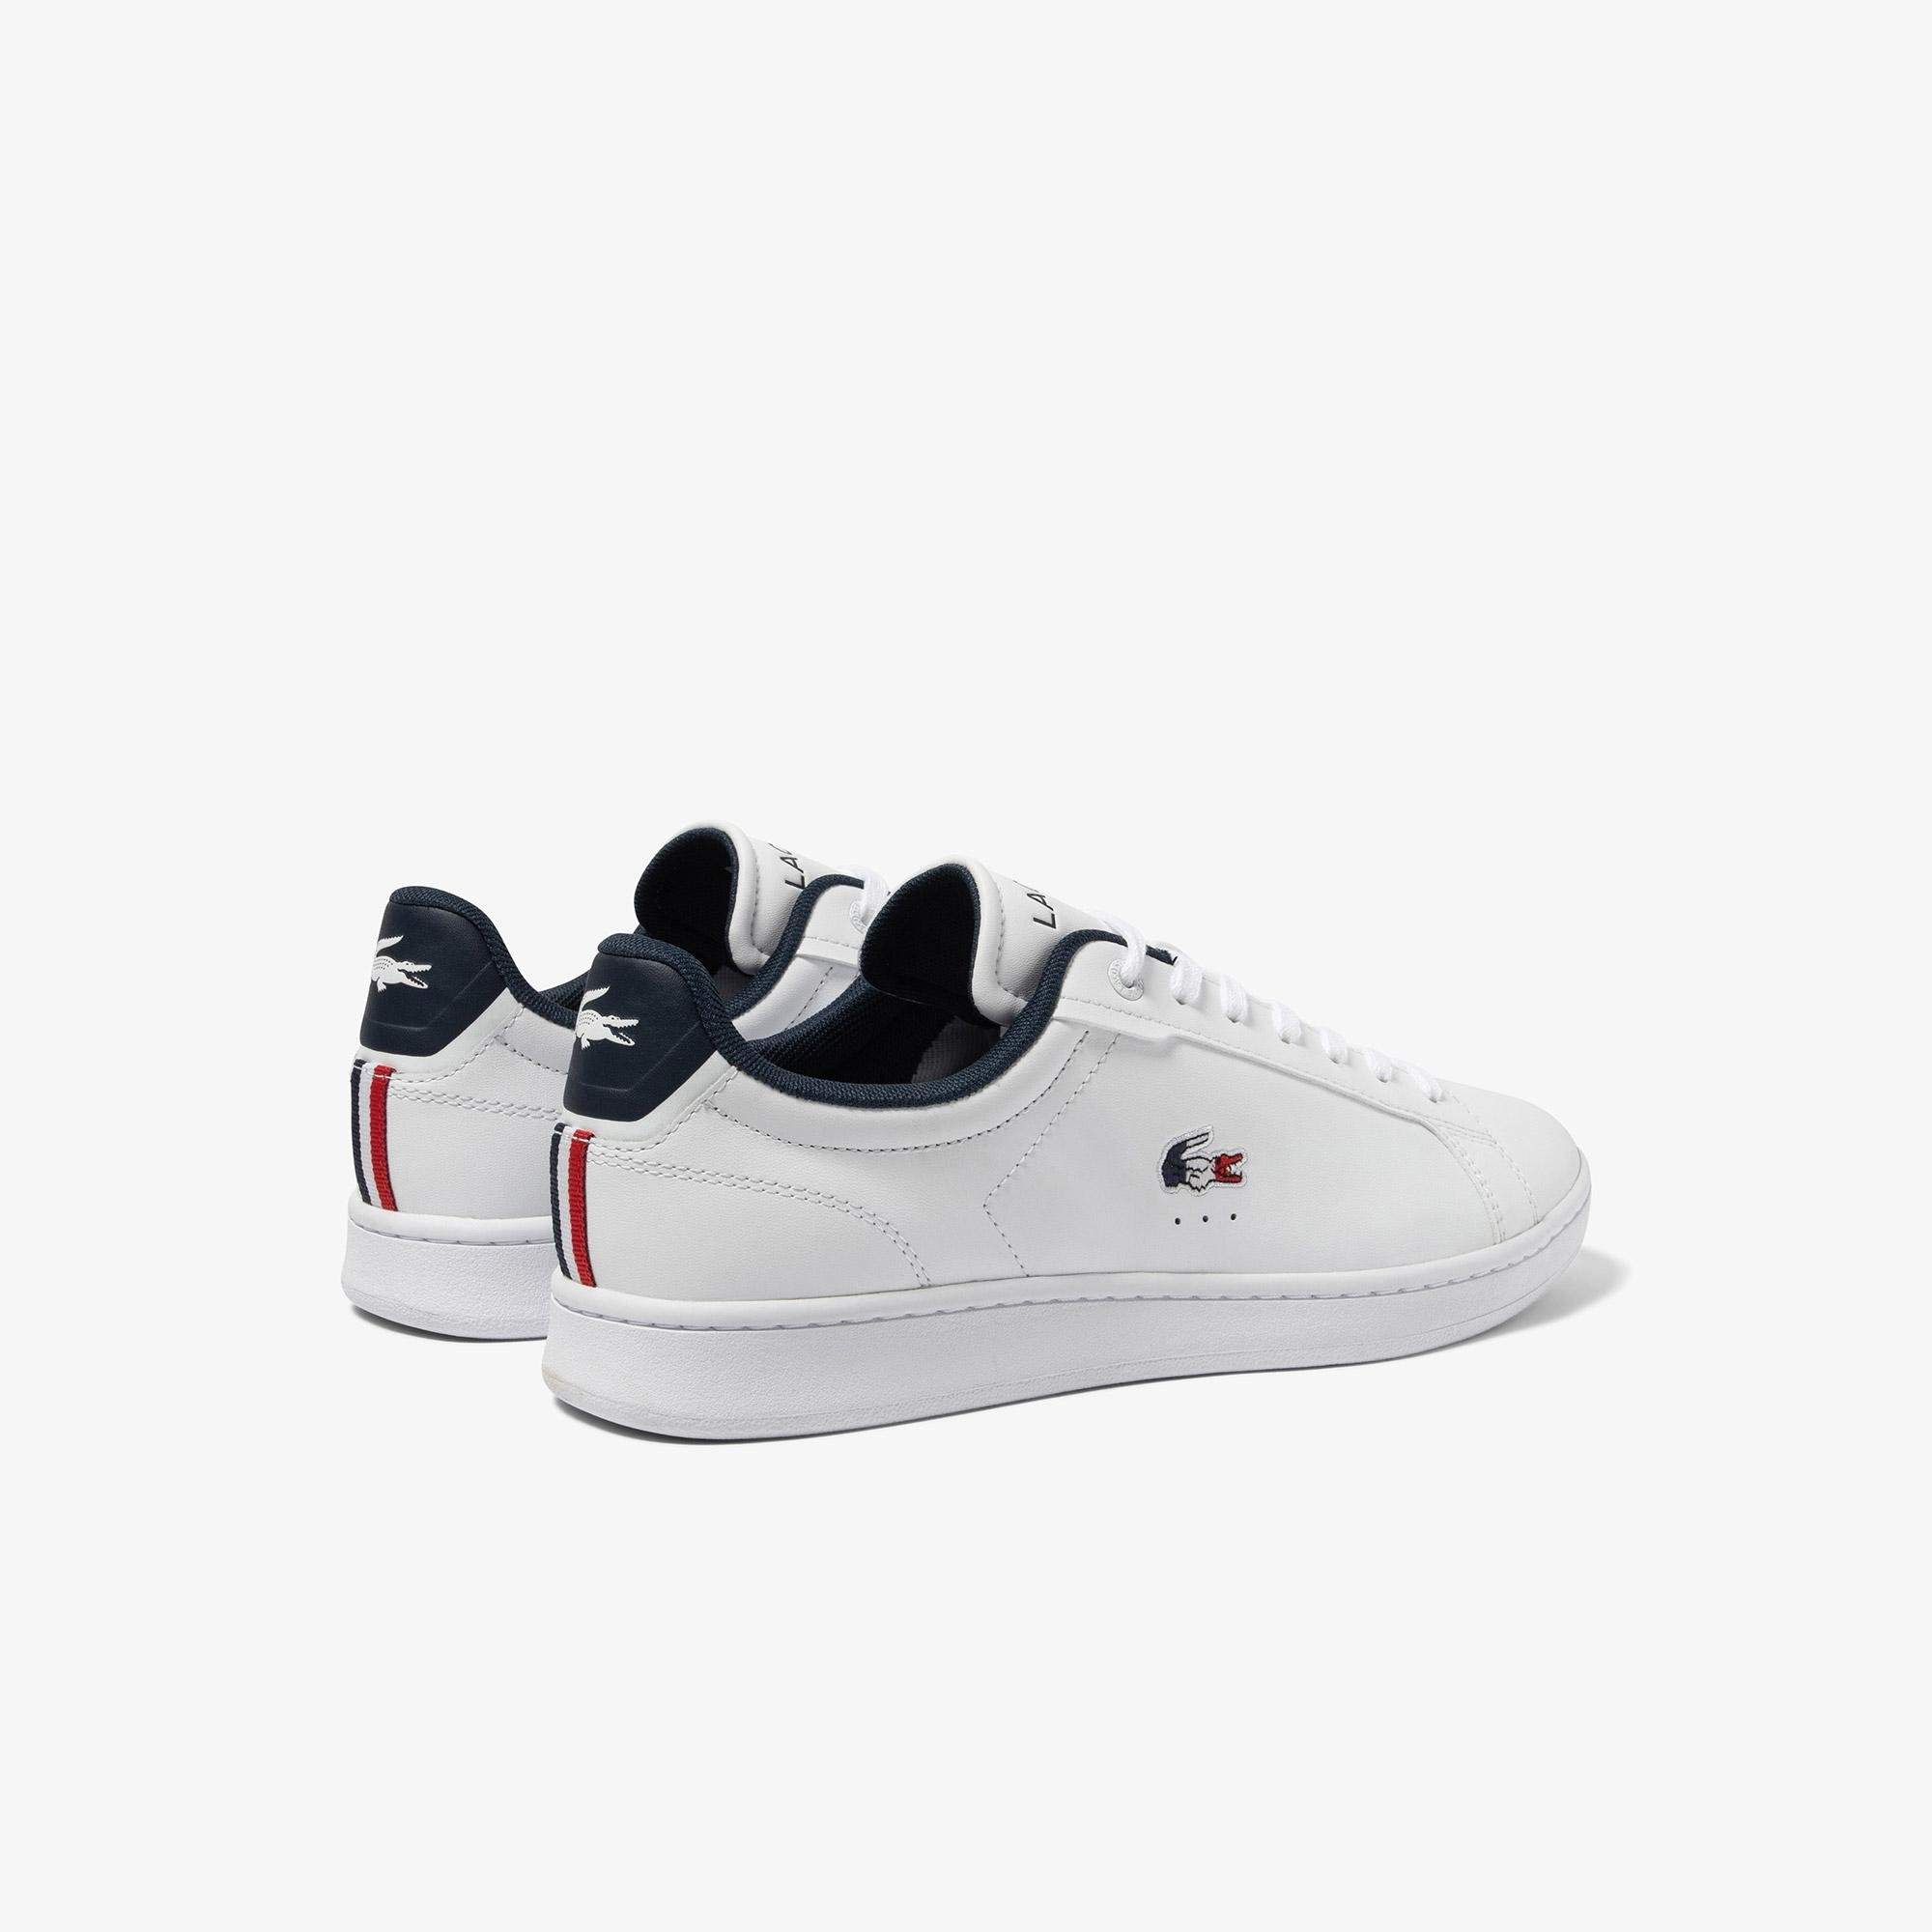 Lacoste Men's Carnaby Pro Leather Tricolour Trainers